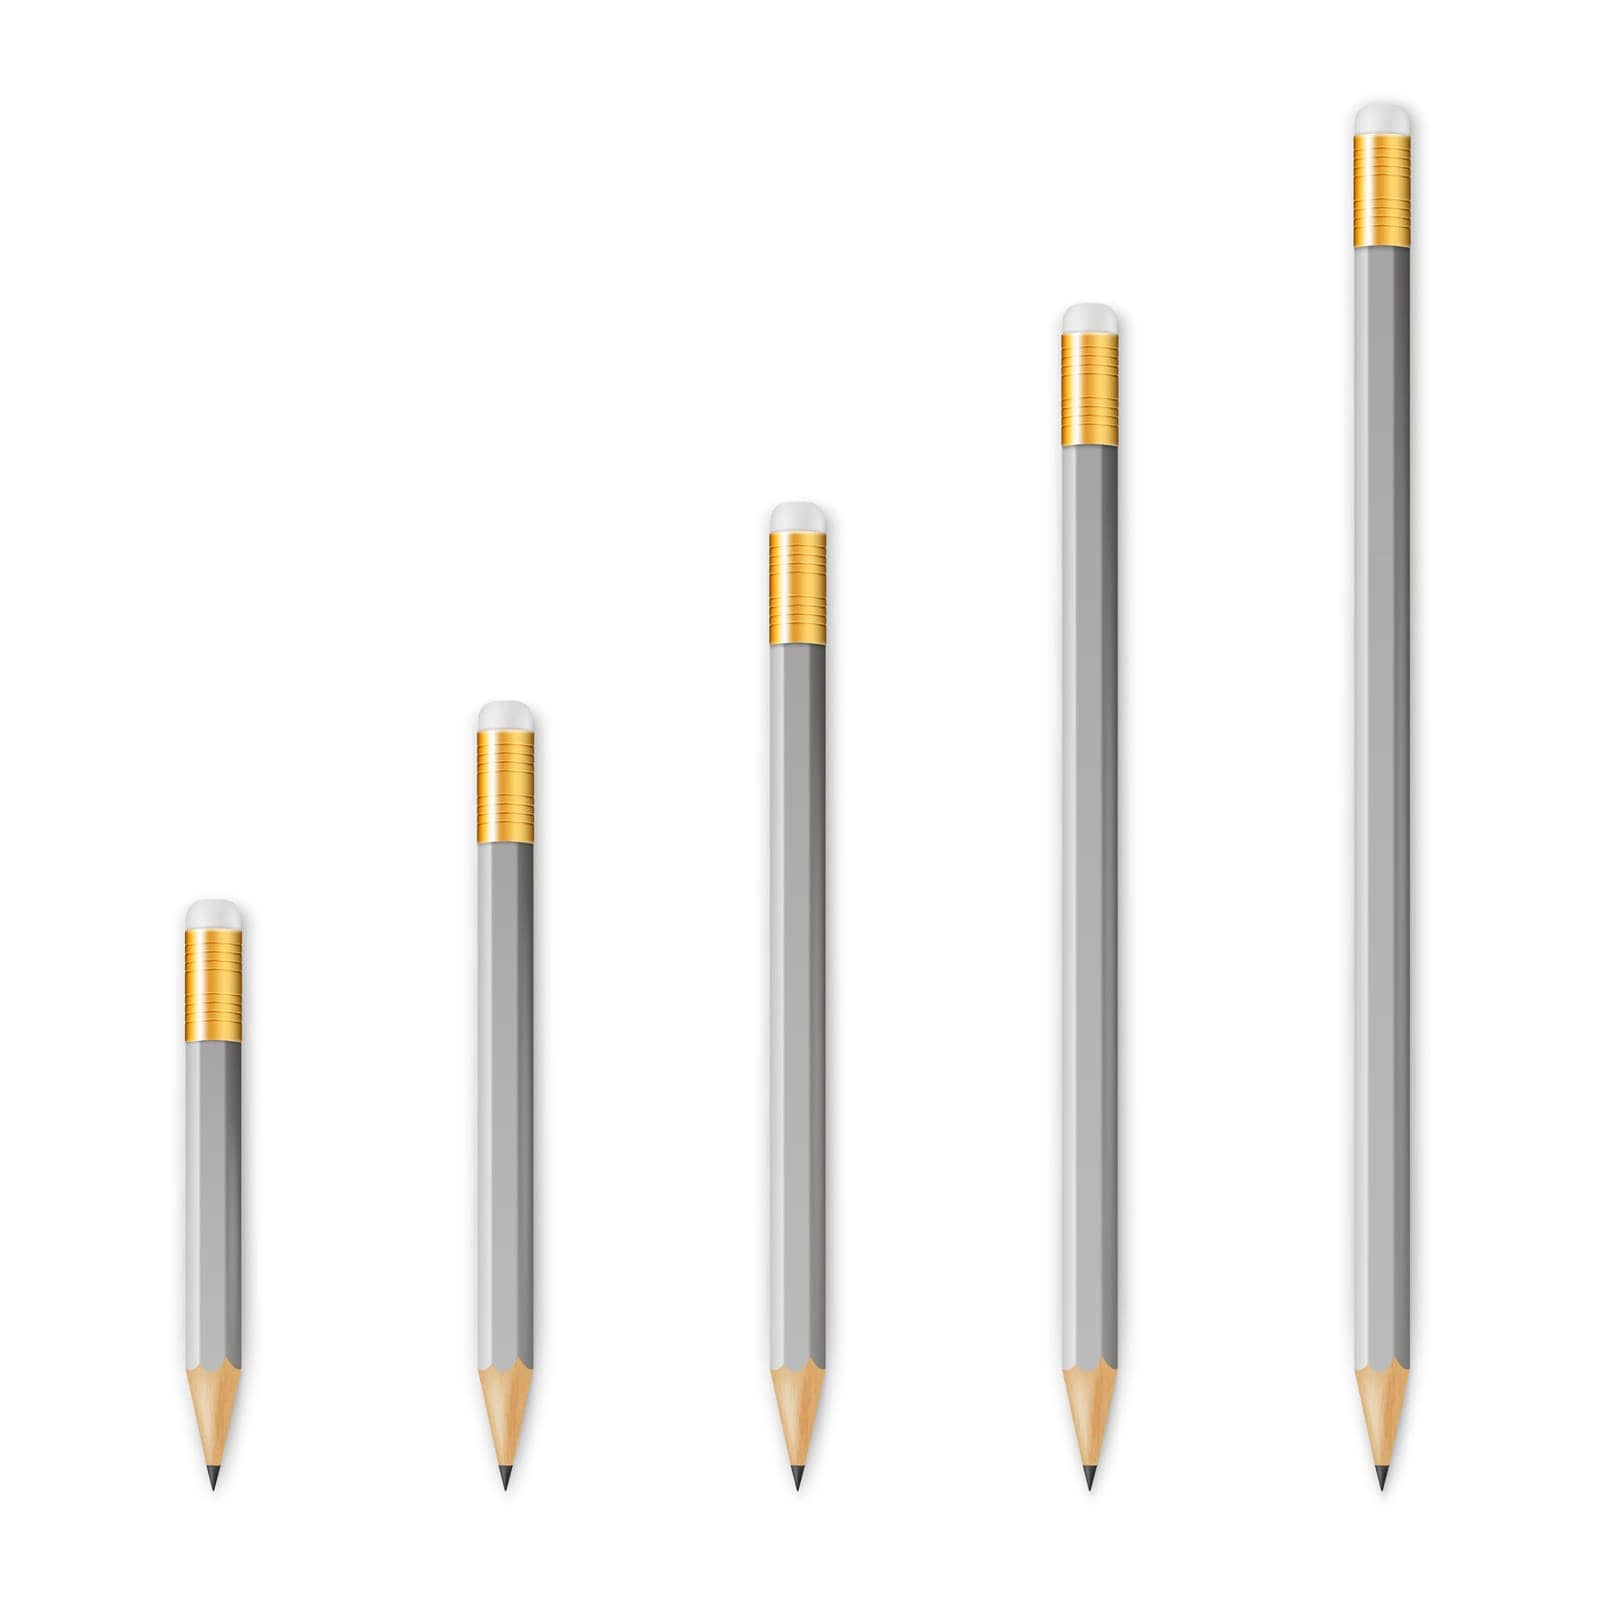 Gray wooden sharp pencils isolated on a white background. Vector EPS10 illustration.